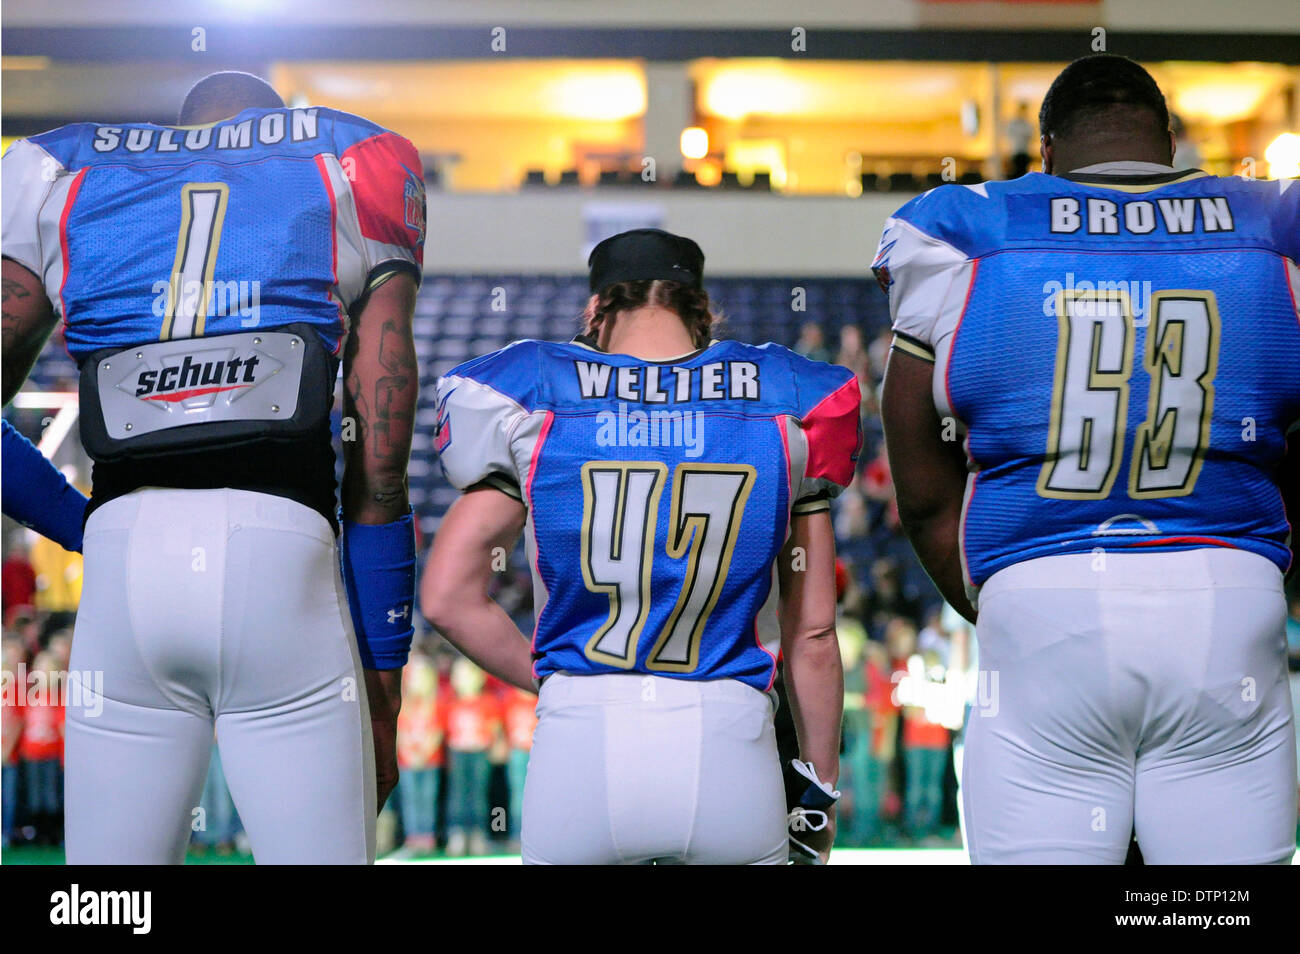 Allen, TX, USA. 21st Feb, 2014. Texas Revolution running back Jennifer Welter (47) is flanked by receiver Clinton Solomon (1) and offensive lineman Chris Brown (63) during a pre game payer prior to the Revolution playing the Cedar Rapids Titans in an Indoor Football League game at the Allen Event Center Friday, February 21, 2014, in Allen, Texas. The 5-foot-2-inch, 130 pound Welter is the first woman to play professional football at a position other than kicker, she made the final roster of the Texas Revolution of the Indoor Football League, as a running back. © csm/Alamy Live News Stock Photo